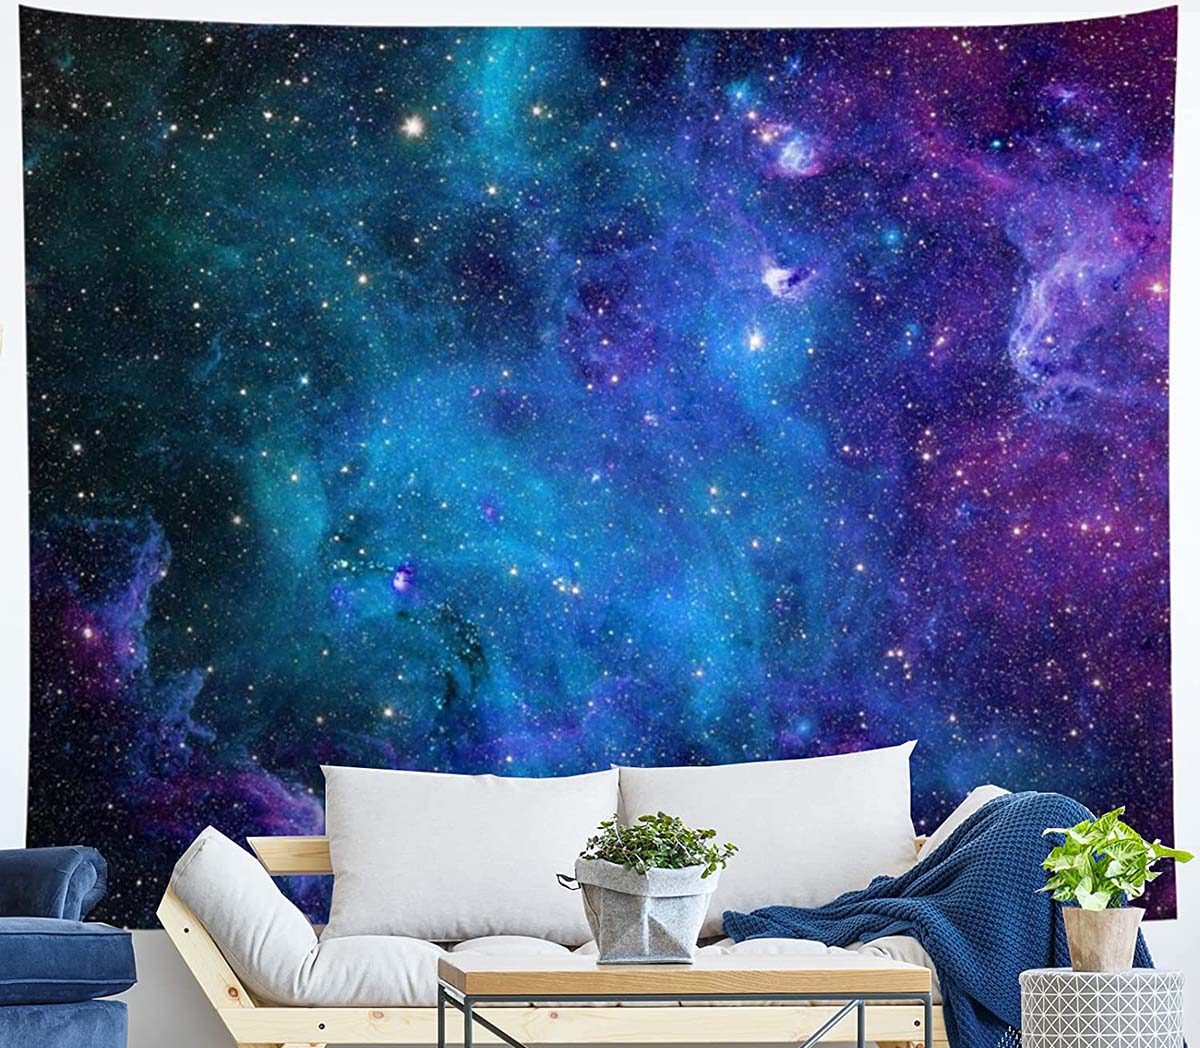 The Best Wall Tapestries Option Starry Sky Tapestry